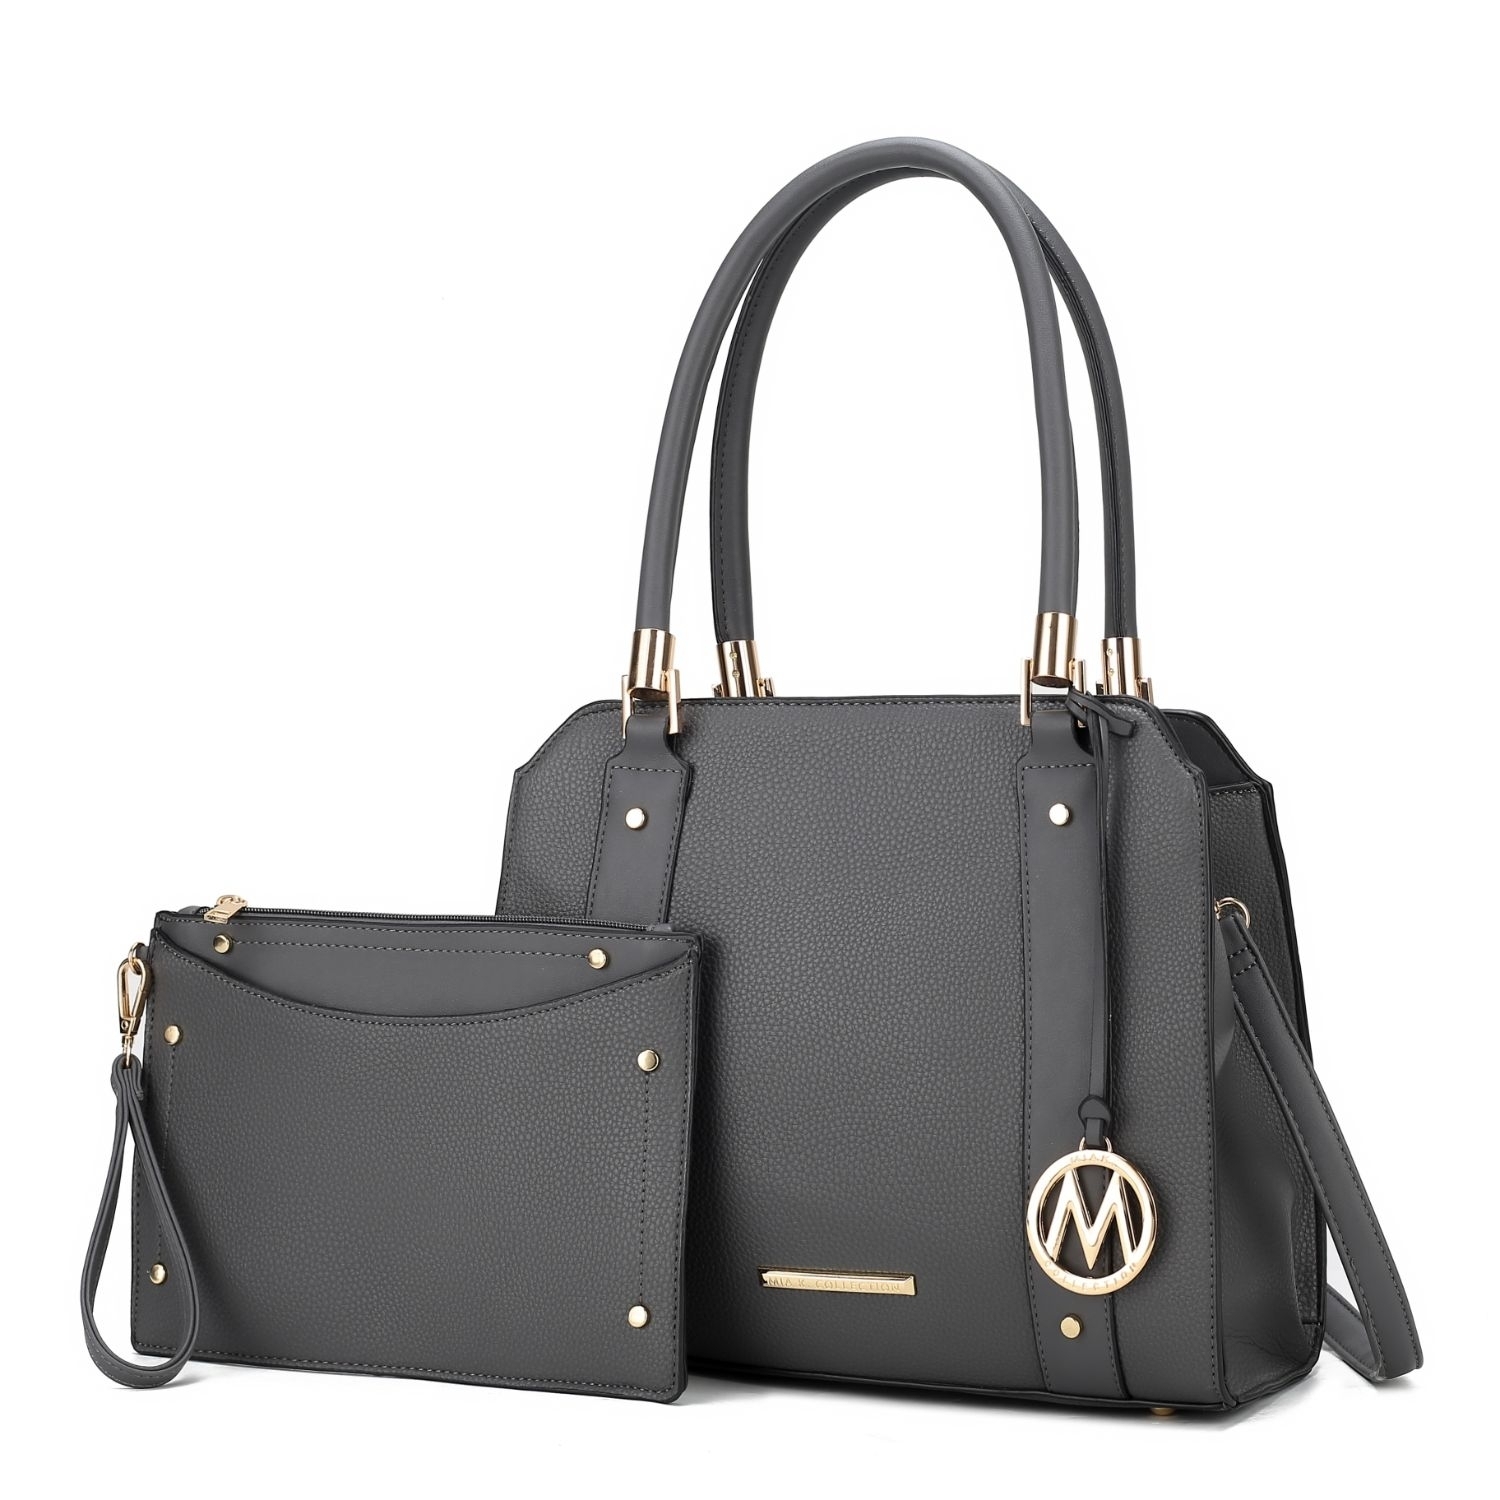 MKF Collection Norah Vegan Leather Women's Satchel Bag With Wristlet -2 Pieces By Mia K - Charcoal